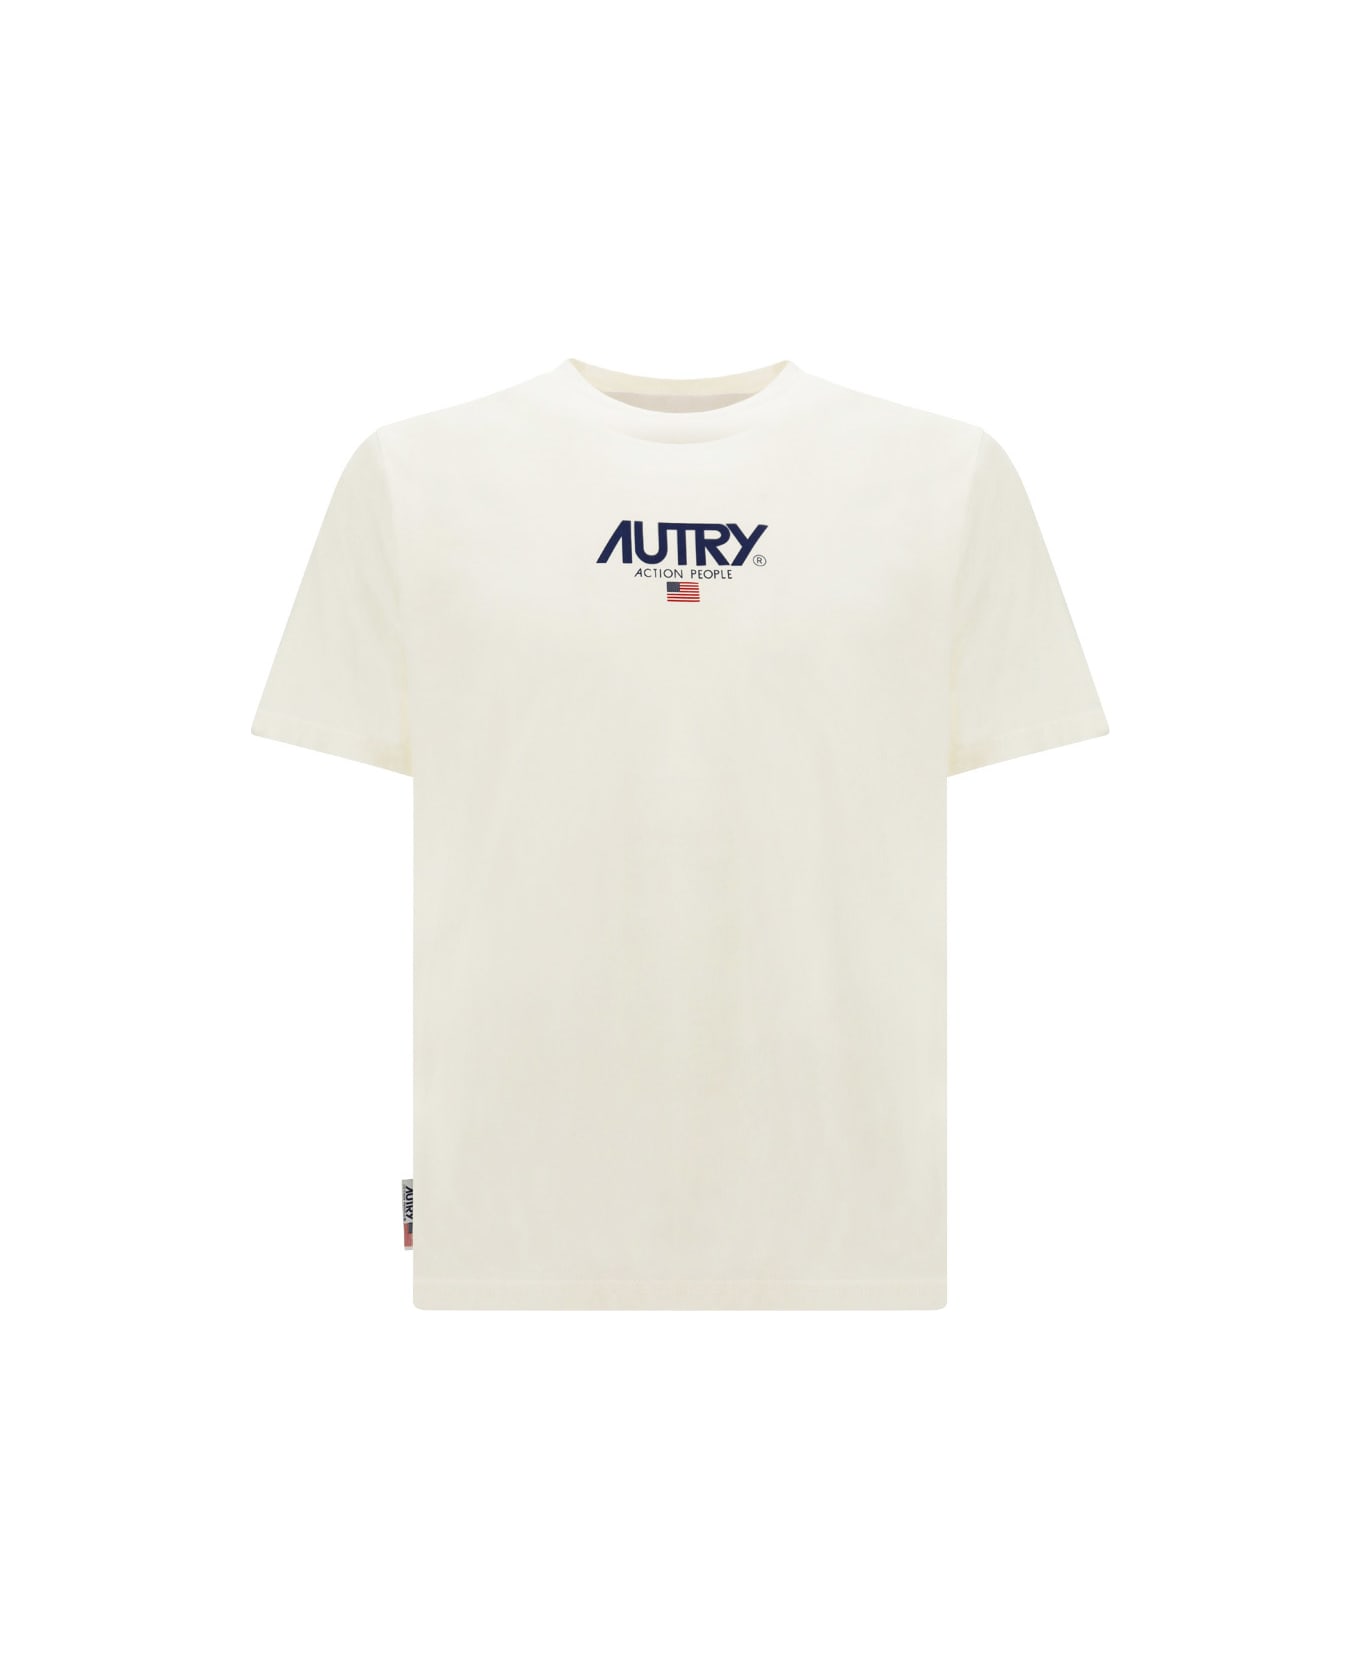 Autry Iconic Action T-shirt - White